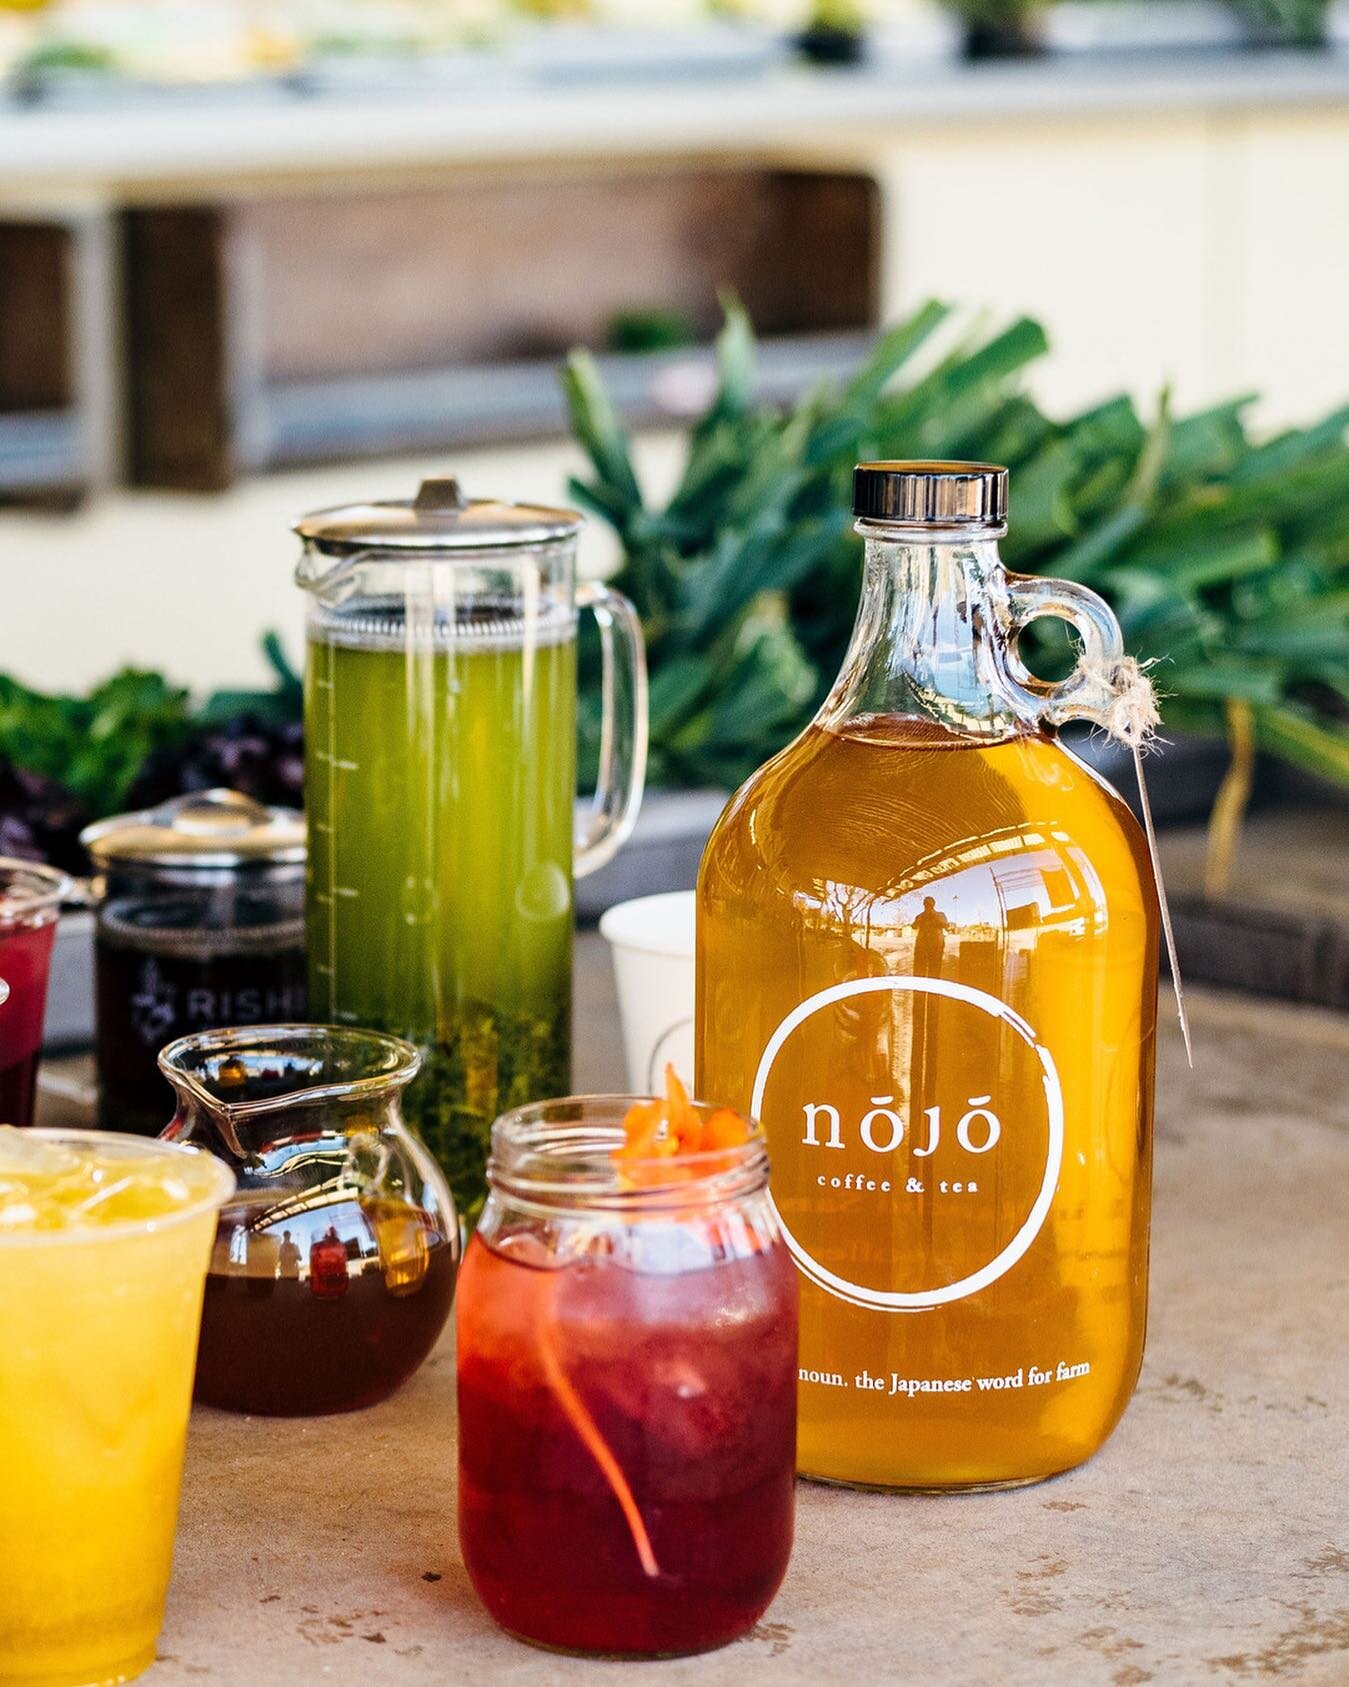 Today's warm temps and strong breeze have me craving iced tea and herbal infusions from @hellonojo at @chinofarms. I love the turmeric ginger chai from @rishitea mixed with sparkling water that's served with a sprig of farm fresh rosemary.